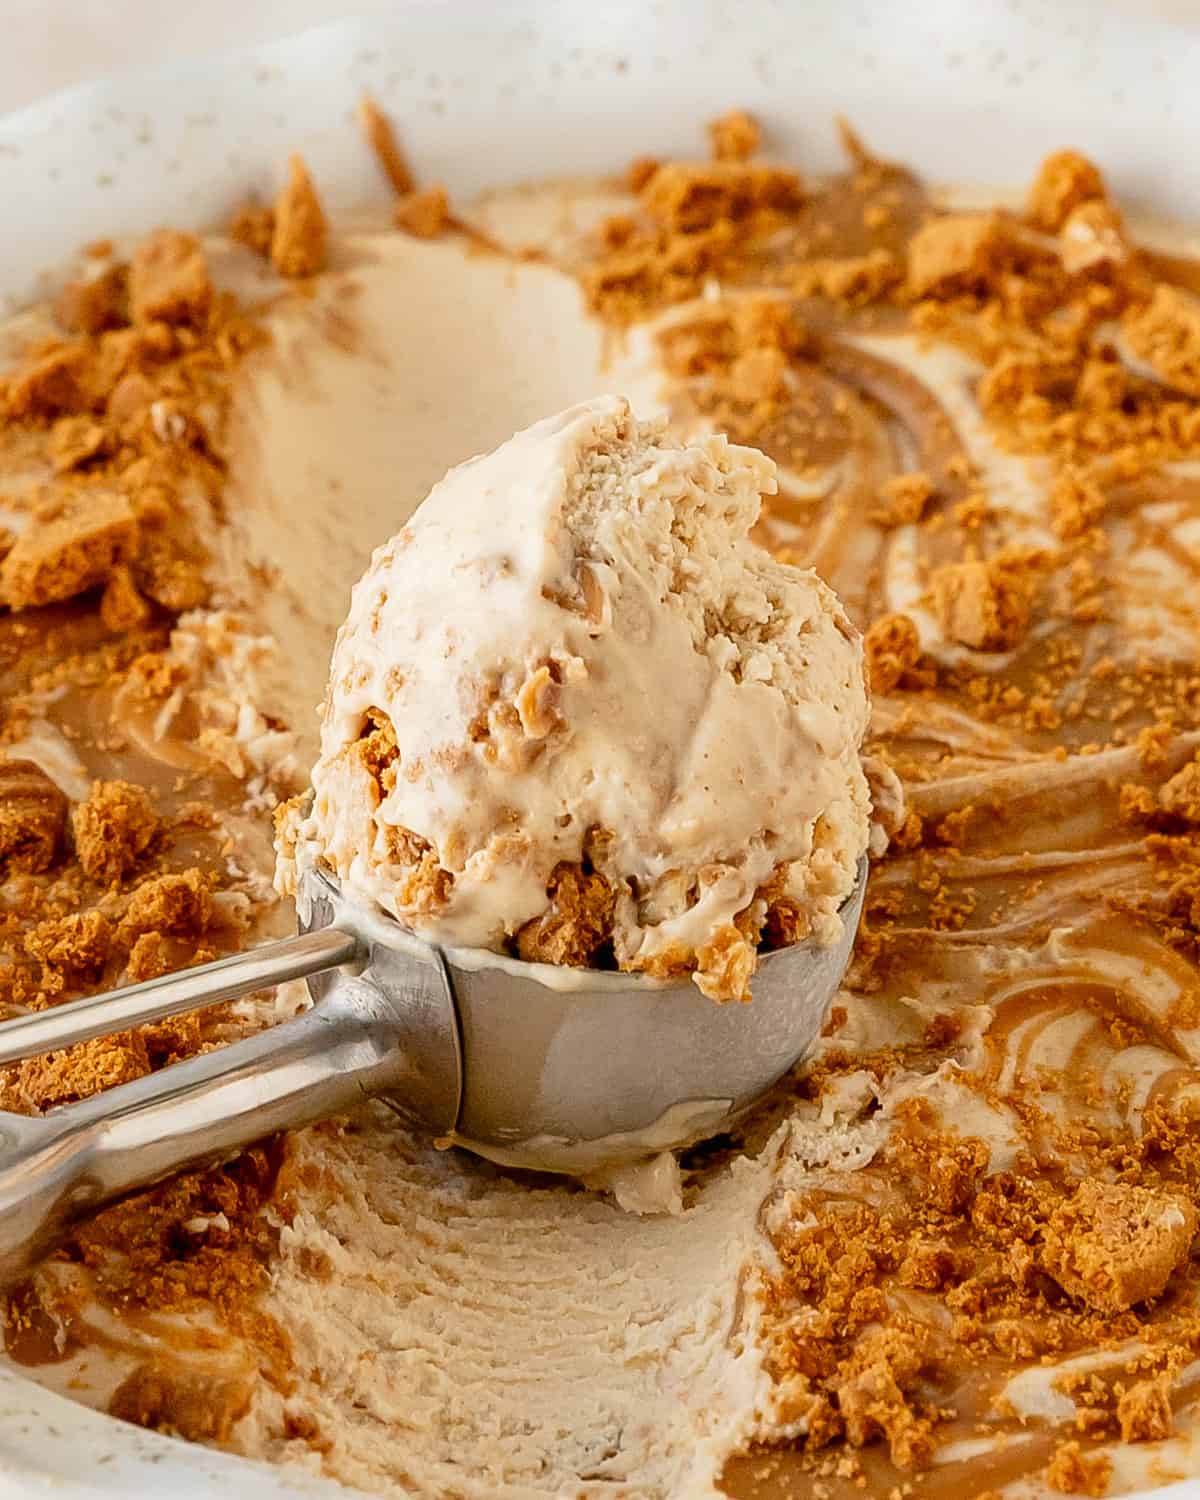 Biscoff ice cream is a creamy, cookie butter ice cream filled with swirls of cookie butter and crushed Lotus Biscoff cookies. Learn how to make Lotus ice cream in a few easy steps with just a few simple ingredients. It’s an easy no churn ice cream recipe everyone will love!